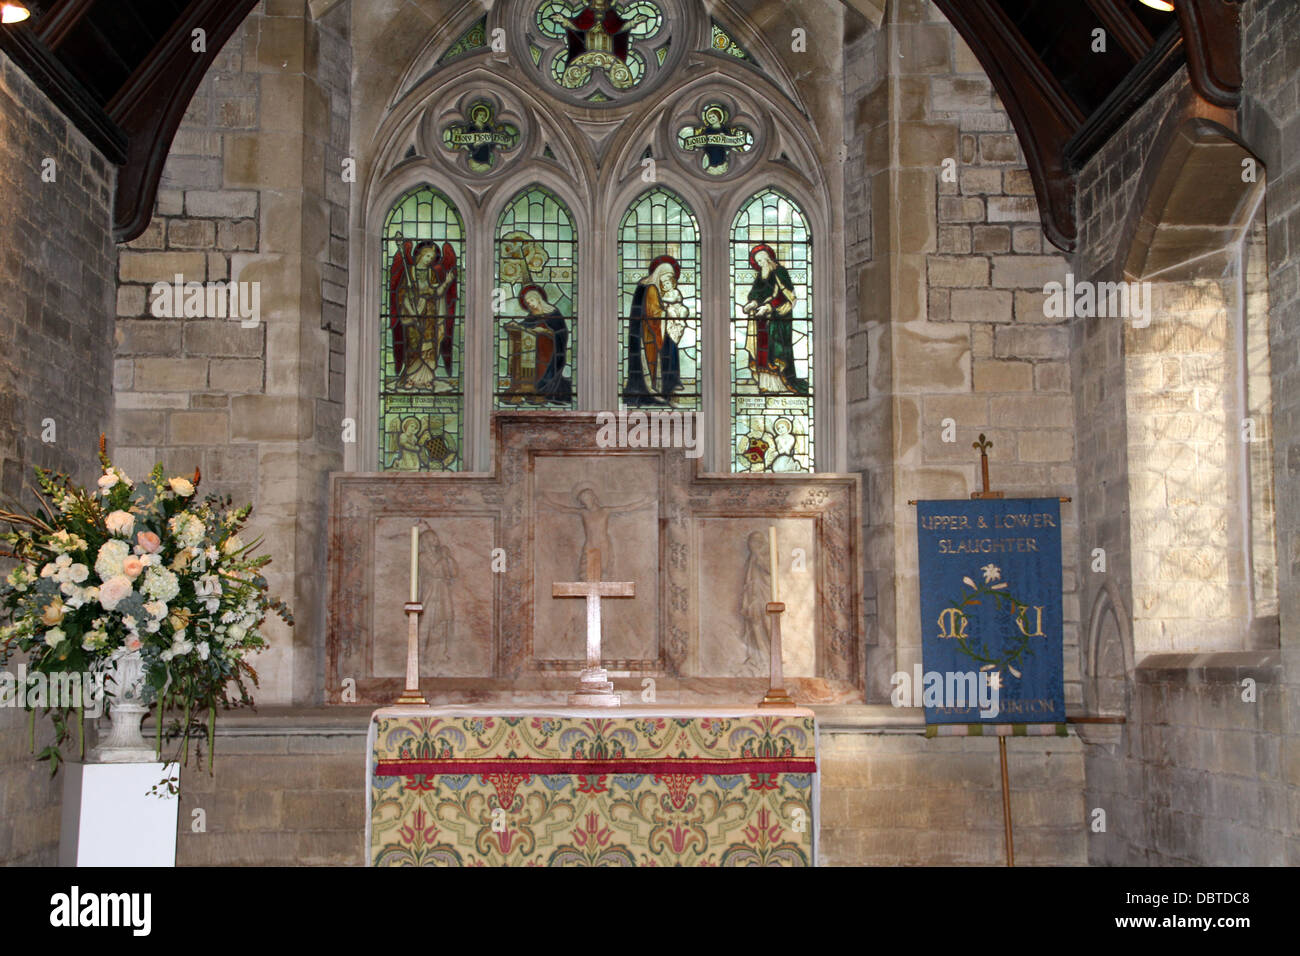 Church alter and stain glass window Stock Photo